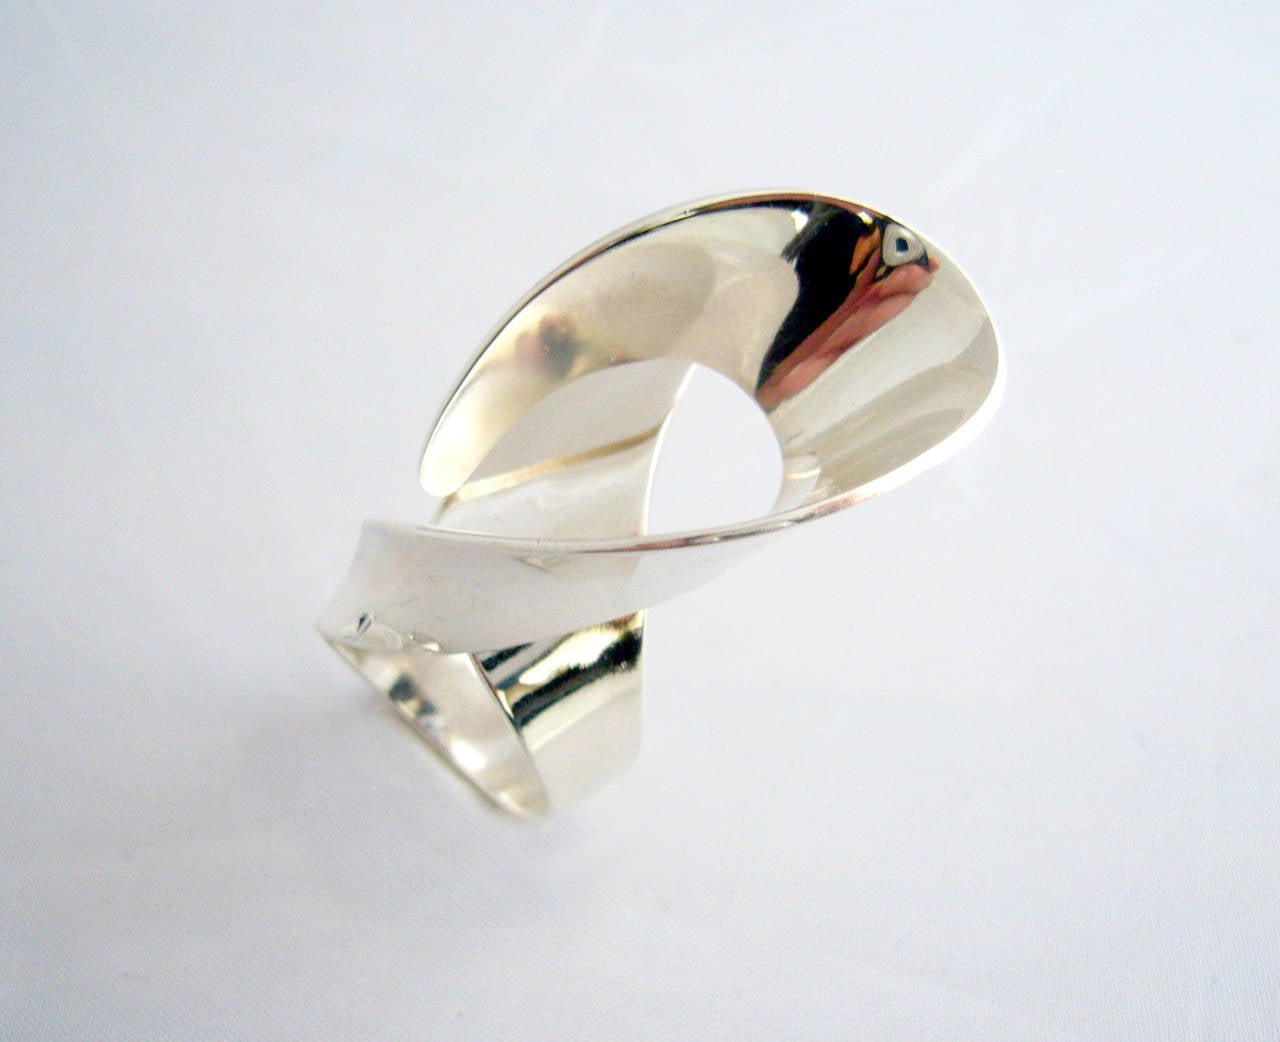 Paula Haivaoja for Kaunis Koru sterling silver ring, circa 1972.  Ring is comprised of one piece of looping sterling silver that makes up the design along with the shank and has great presence when worn.  Currently a finger size 8 and does have some